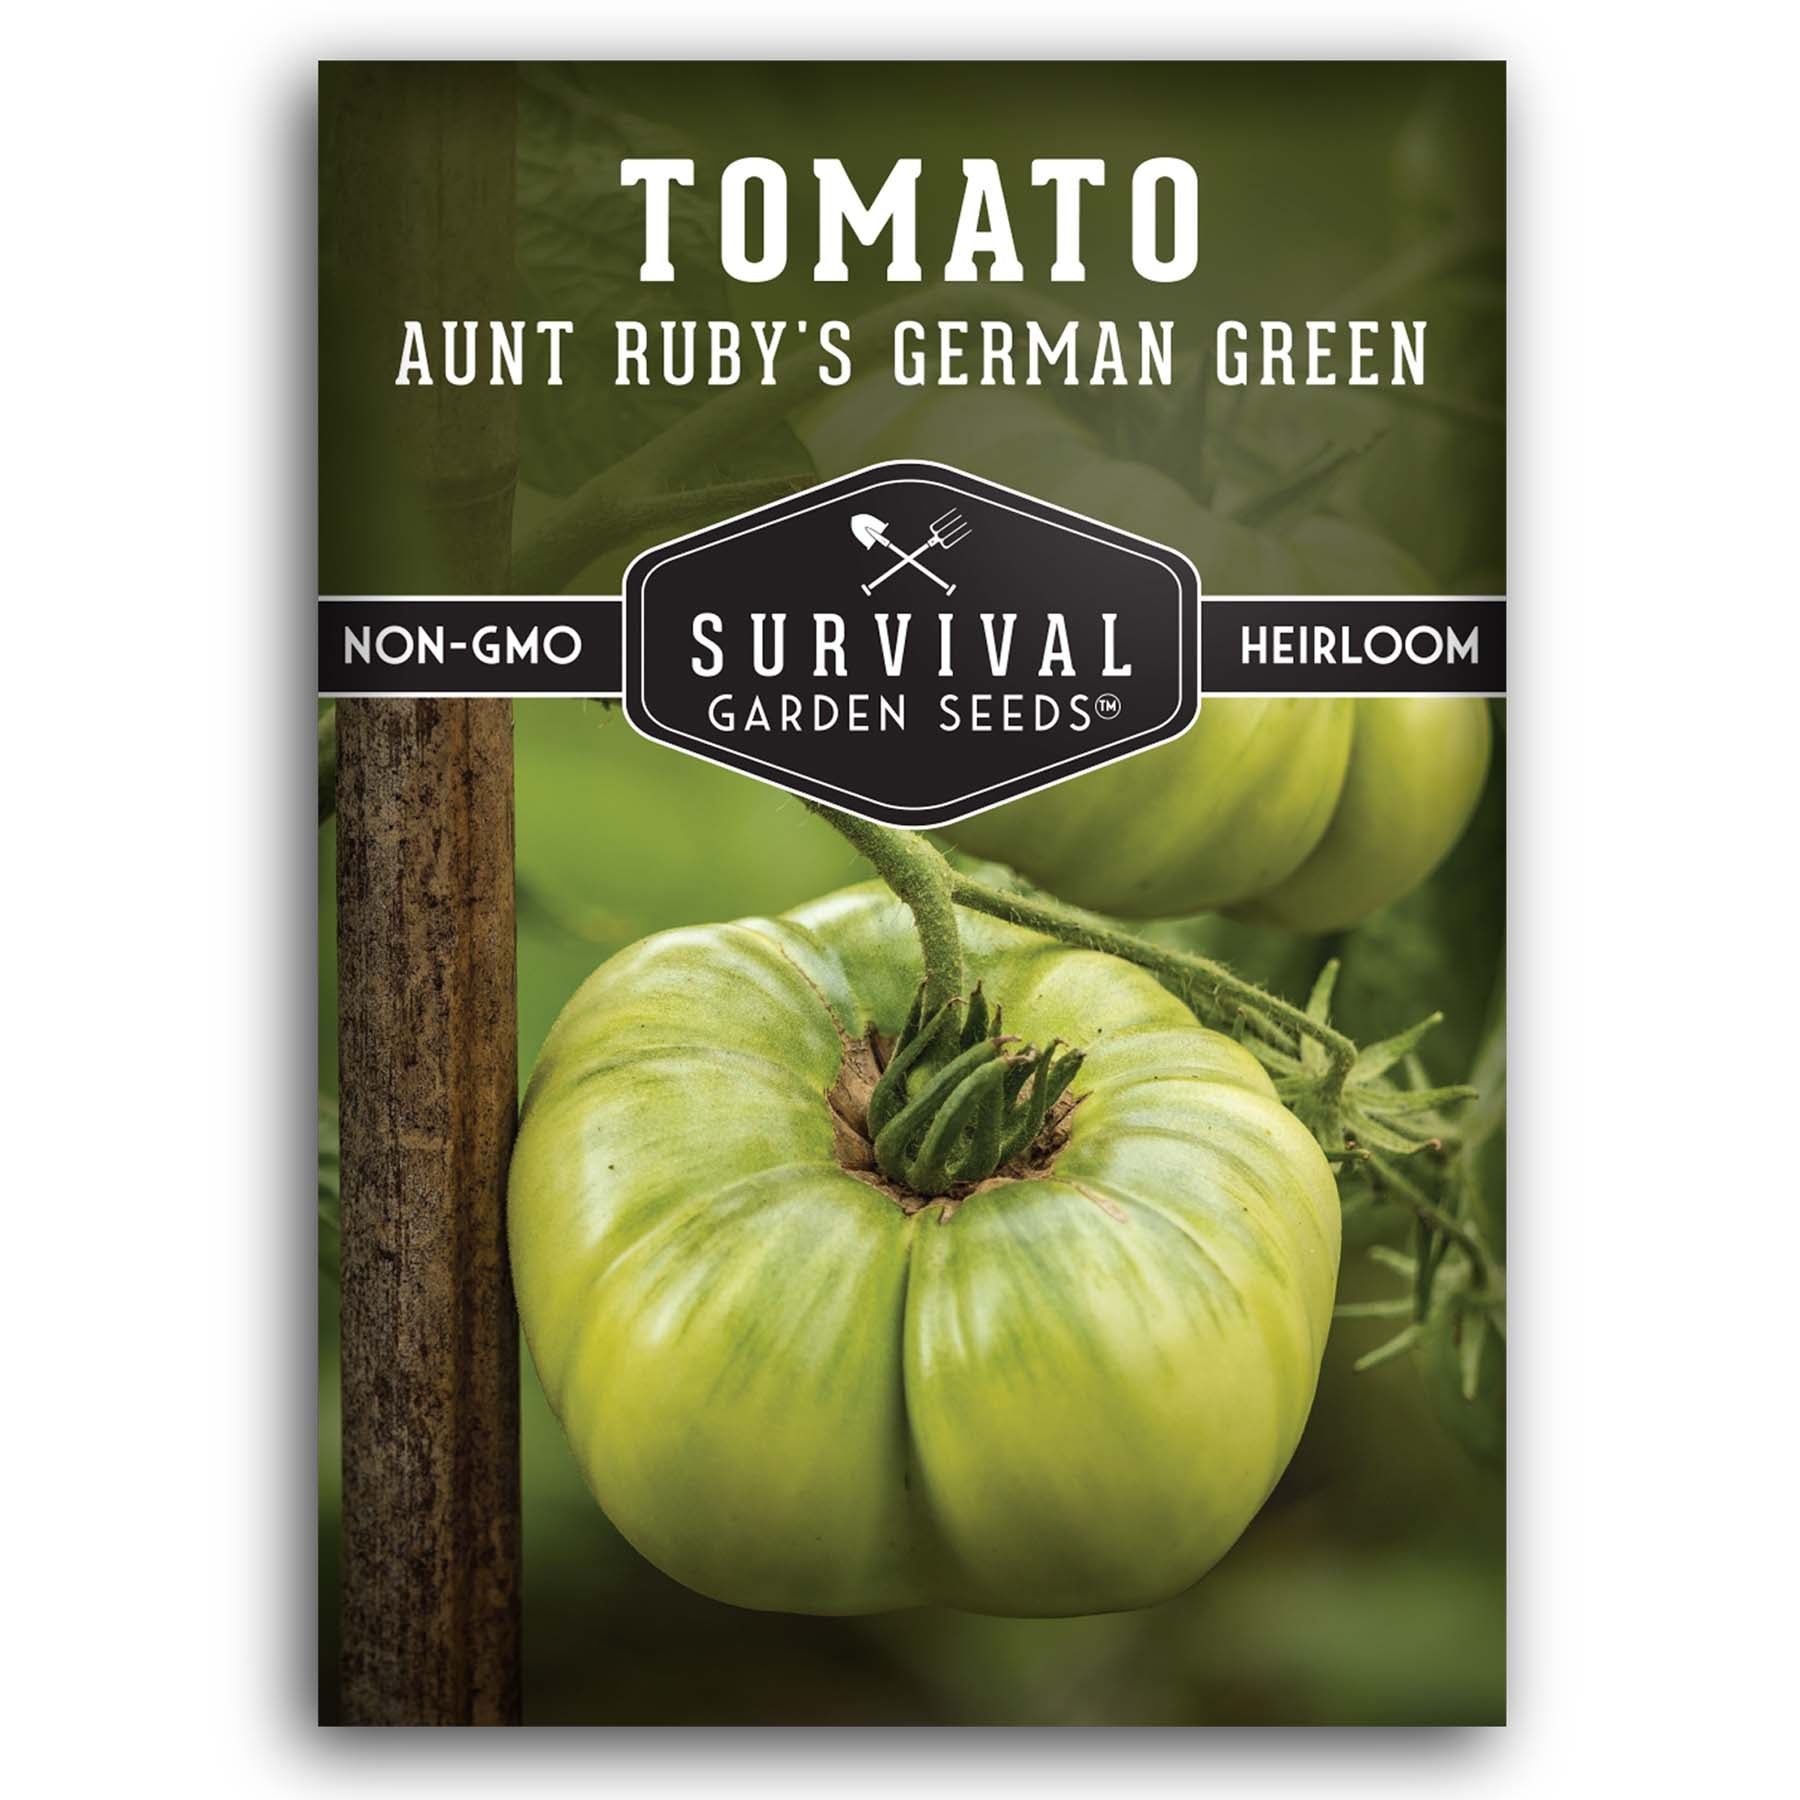 Aunt Ruby's German Green Tomato Seeds for planting